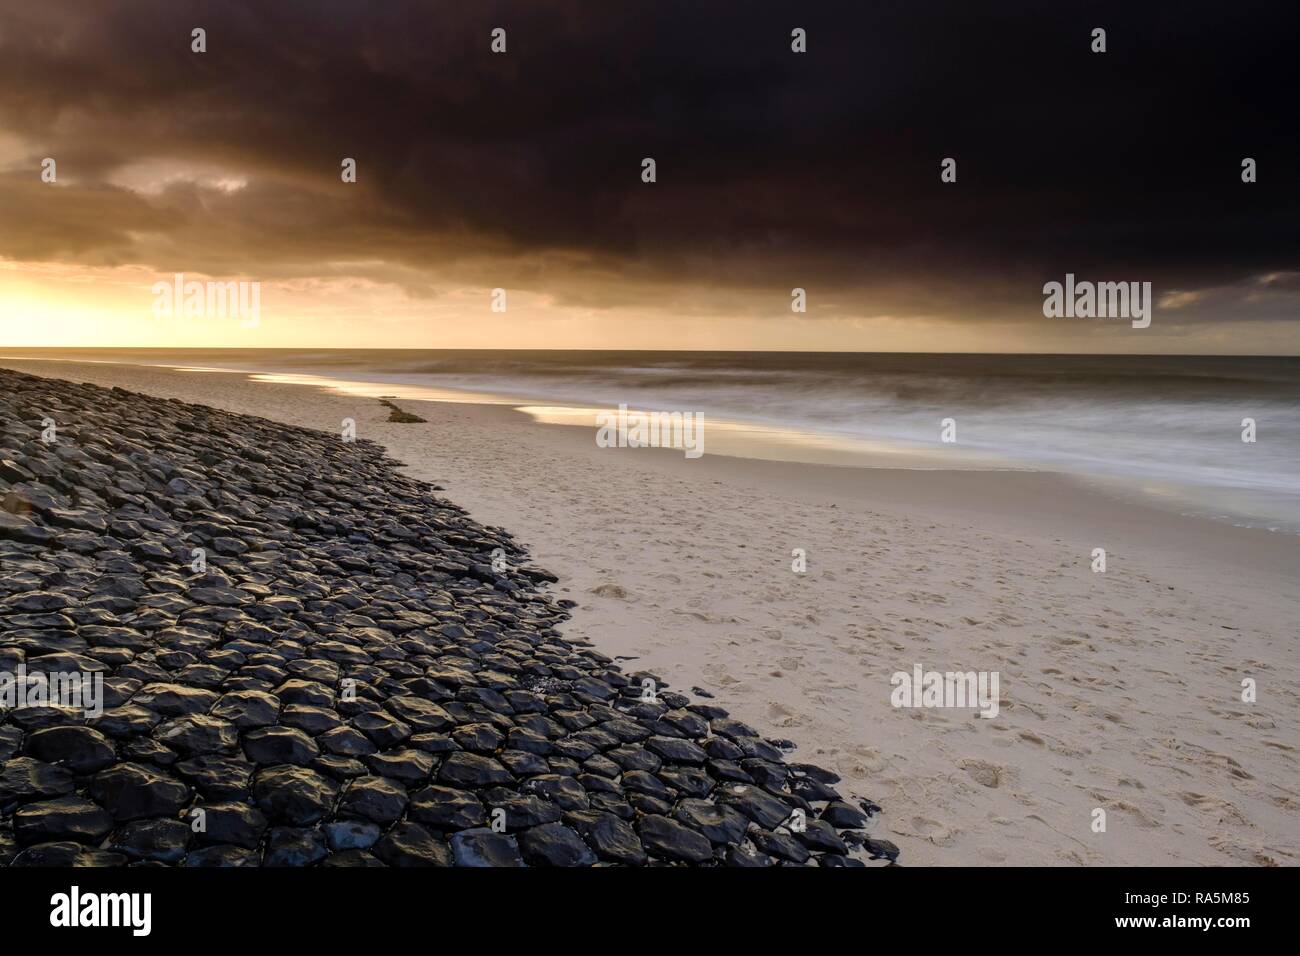 Stone paved beach section, coastal protection, west beach, Sylt, Nordfriesland, Schleswig-Holstein, Germany Stock Photo